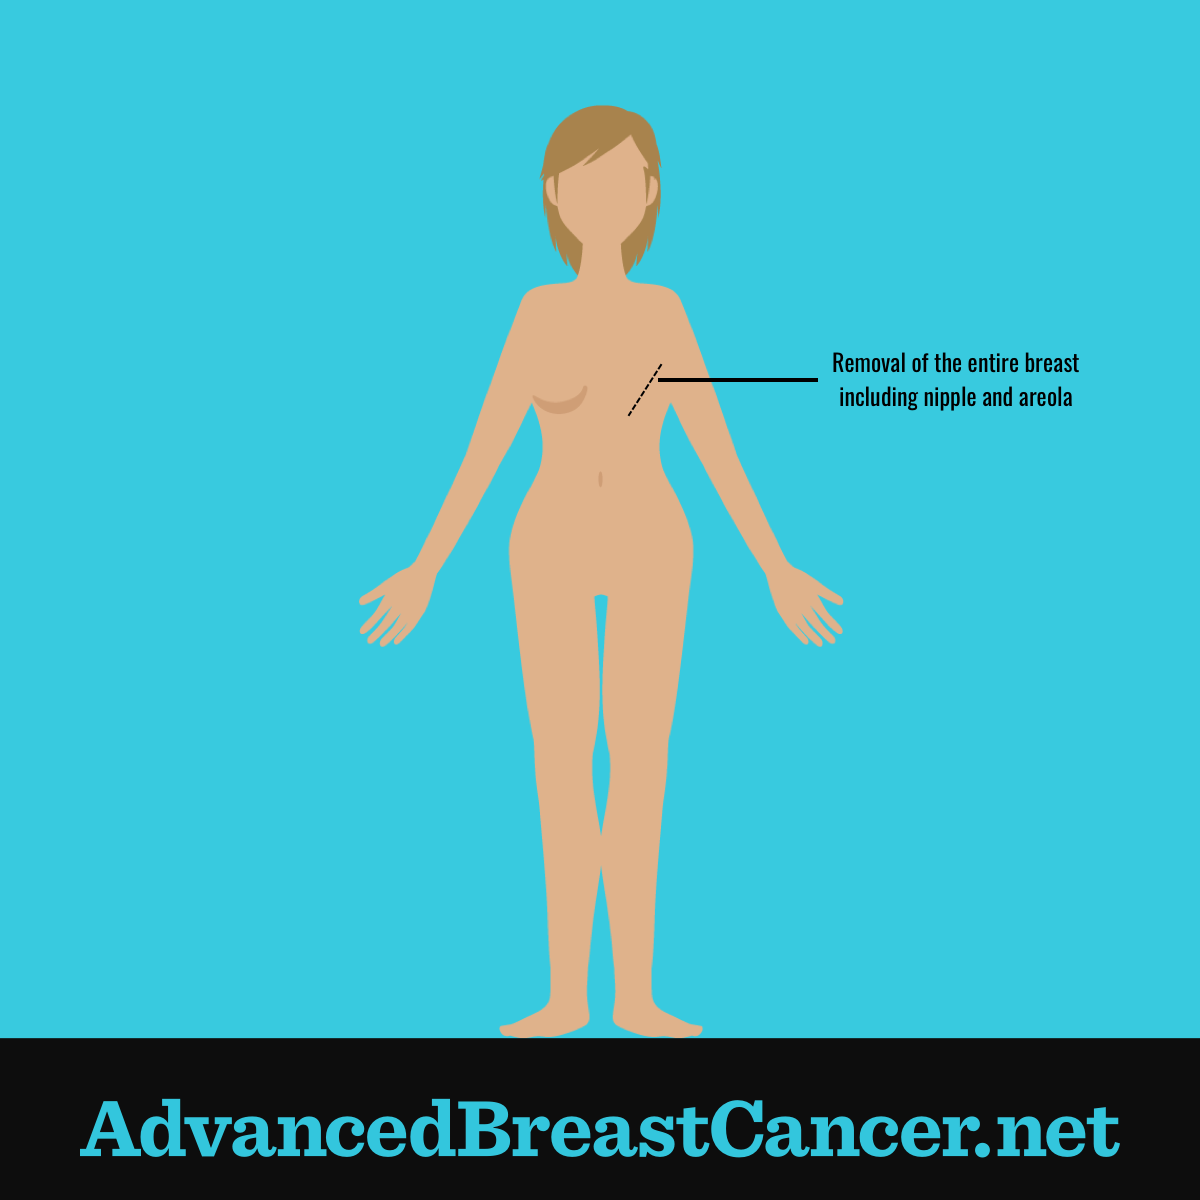 Human figure showing the right breast including the nipple and areola have been removed and has a large scar.